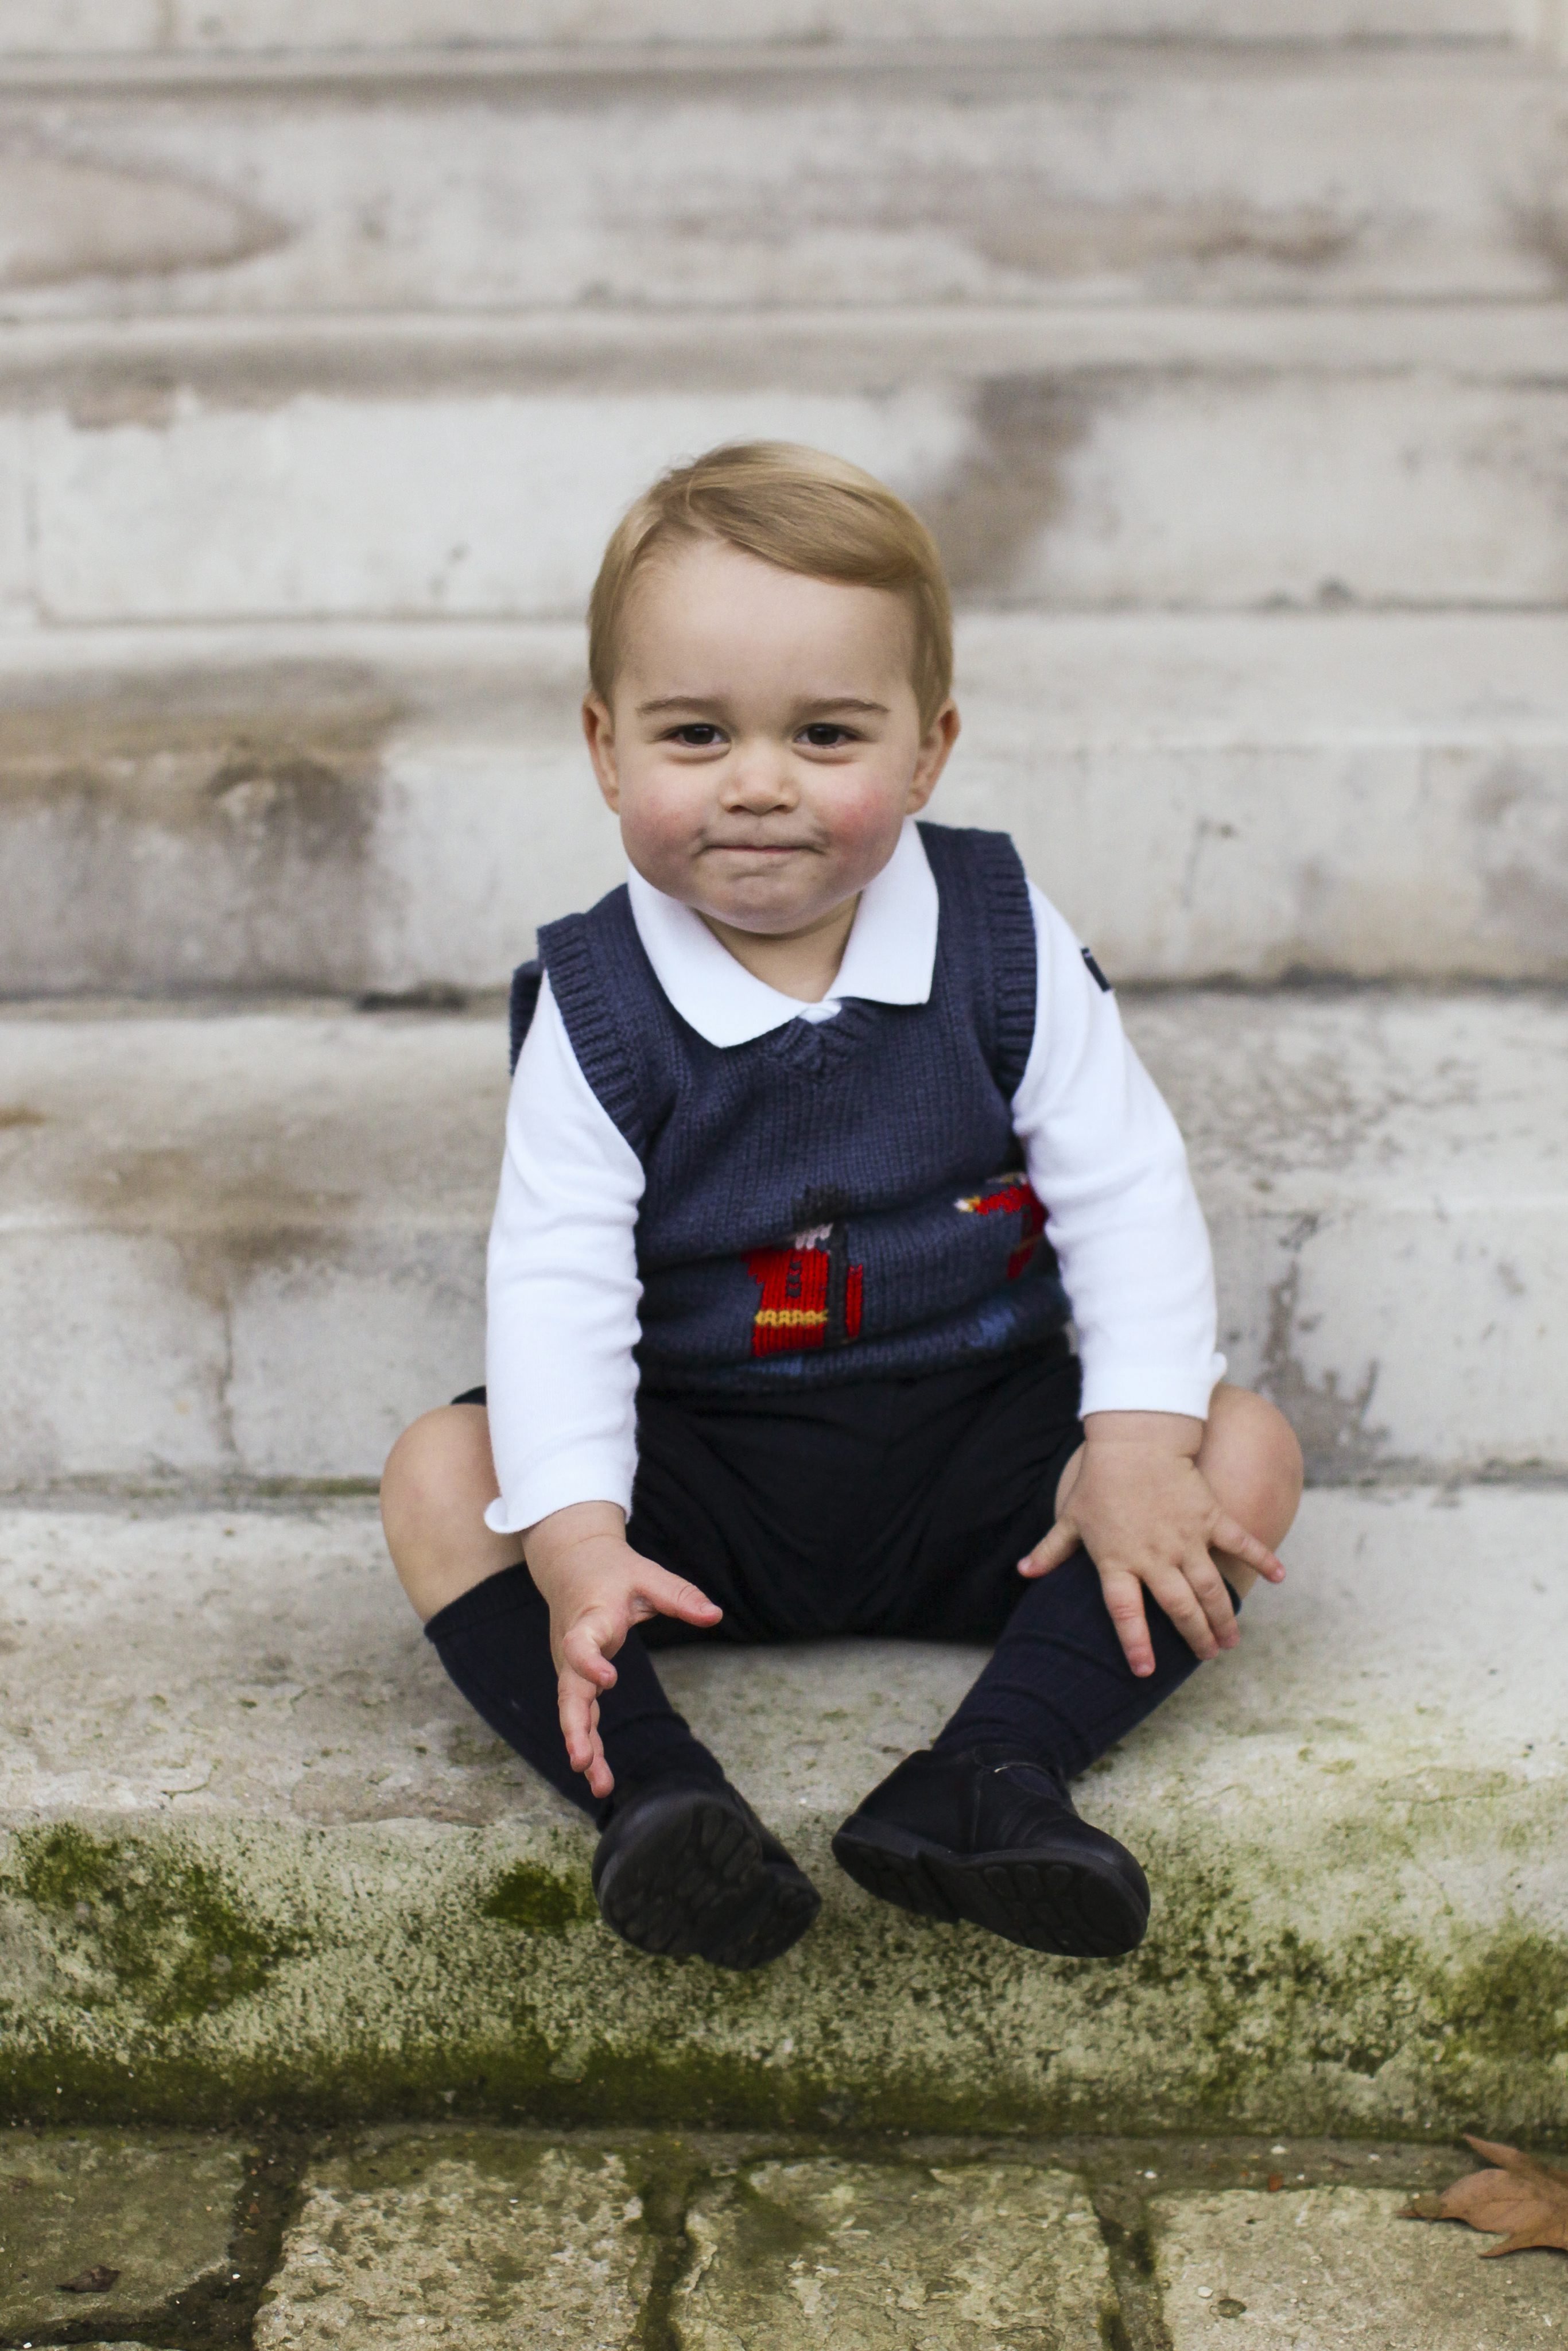 A Christmas photo of Prince George in a courtyard at Kensington Palace, London, released on Dec. 13, 2014. (The Duke and Duchess of Cambridge/EPA)